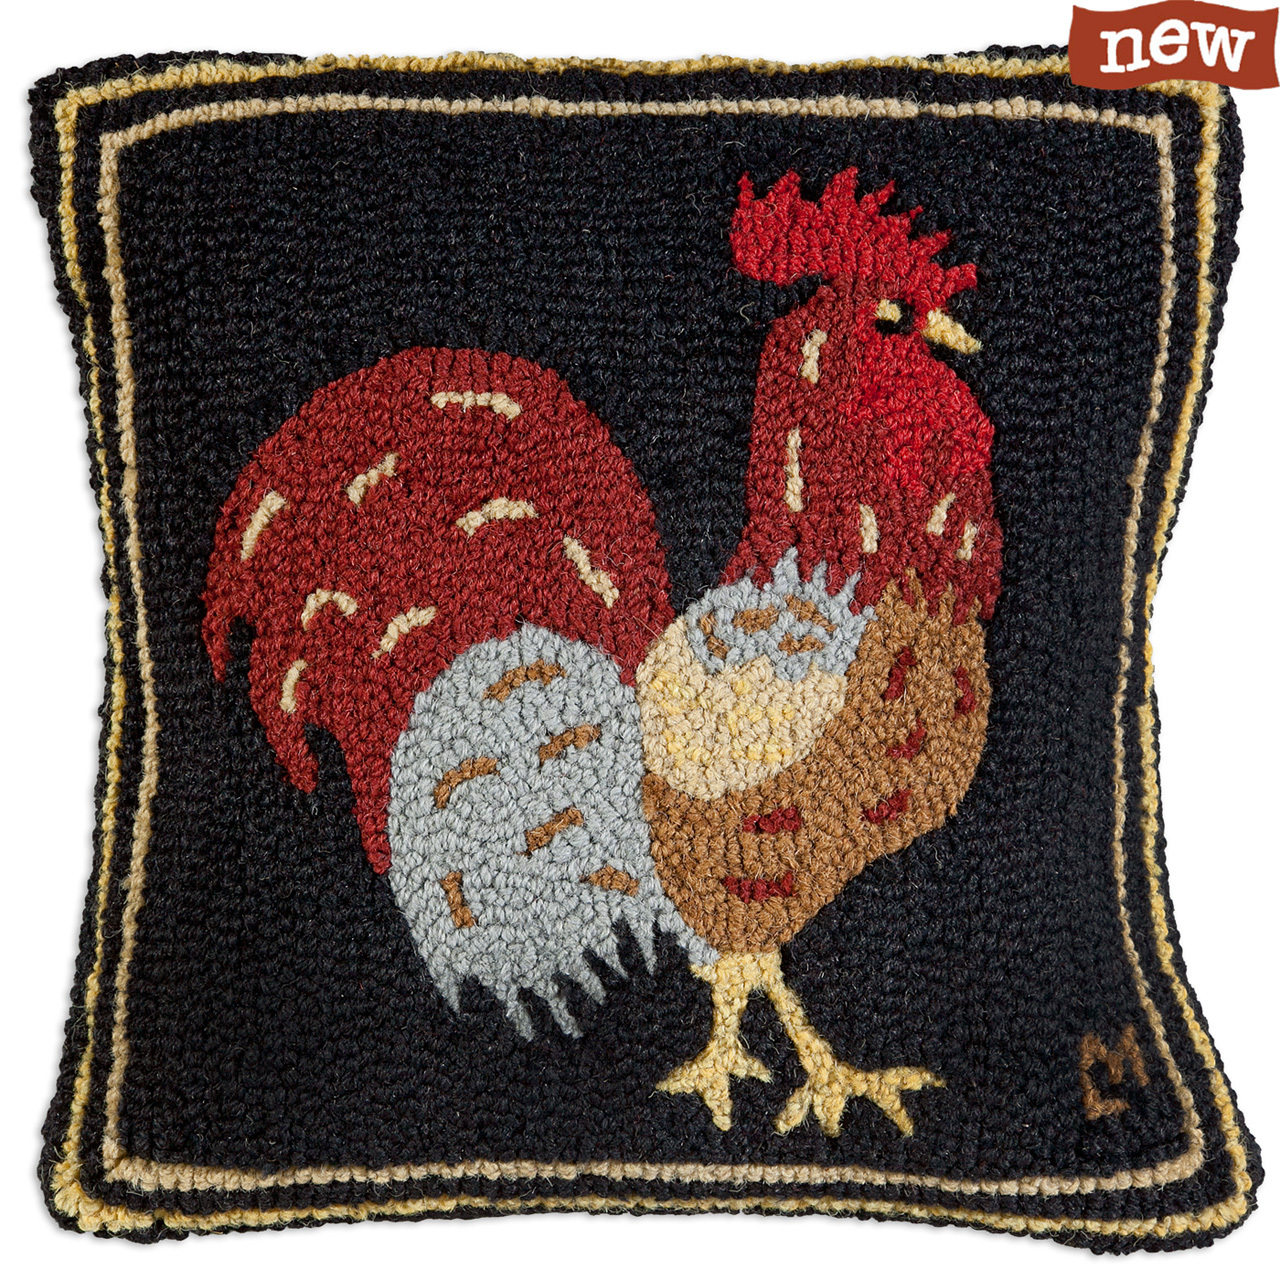 "Chanticleer Rooster" is a new addition to Autumn Harvest collection